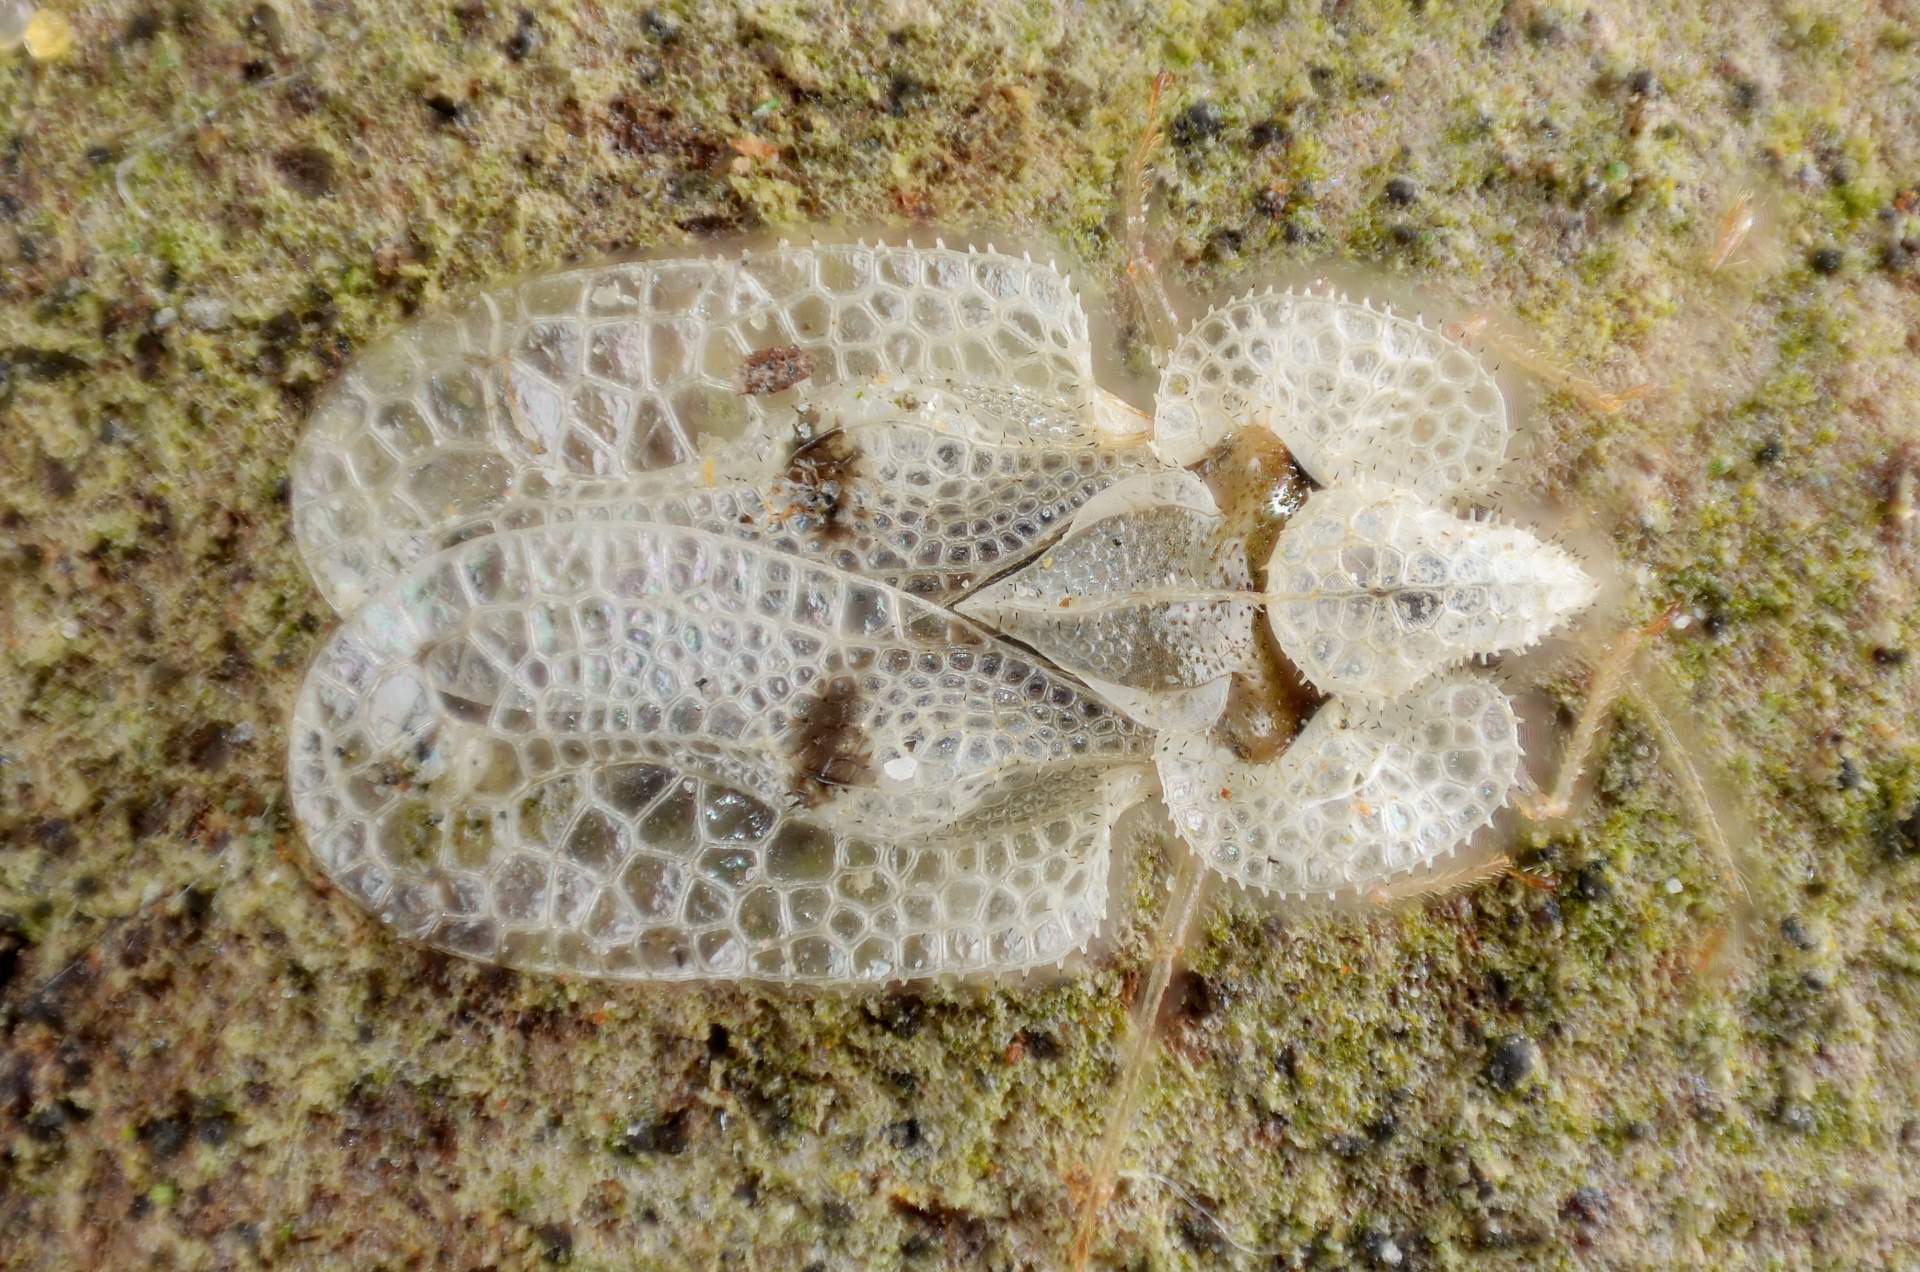 adult Sycamore Lace Bug